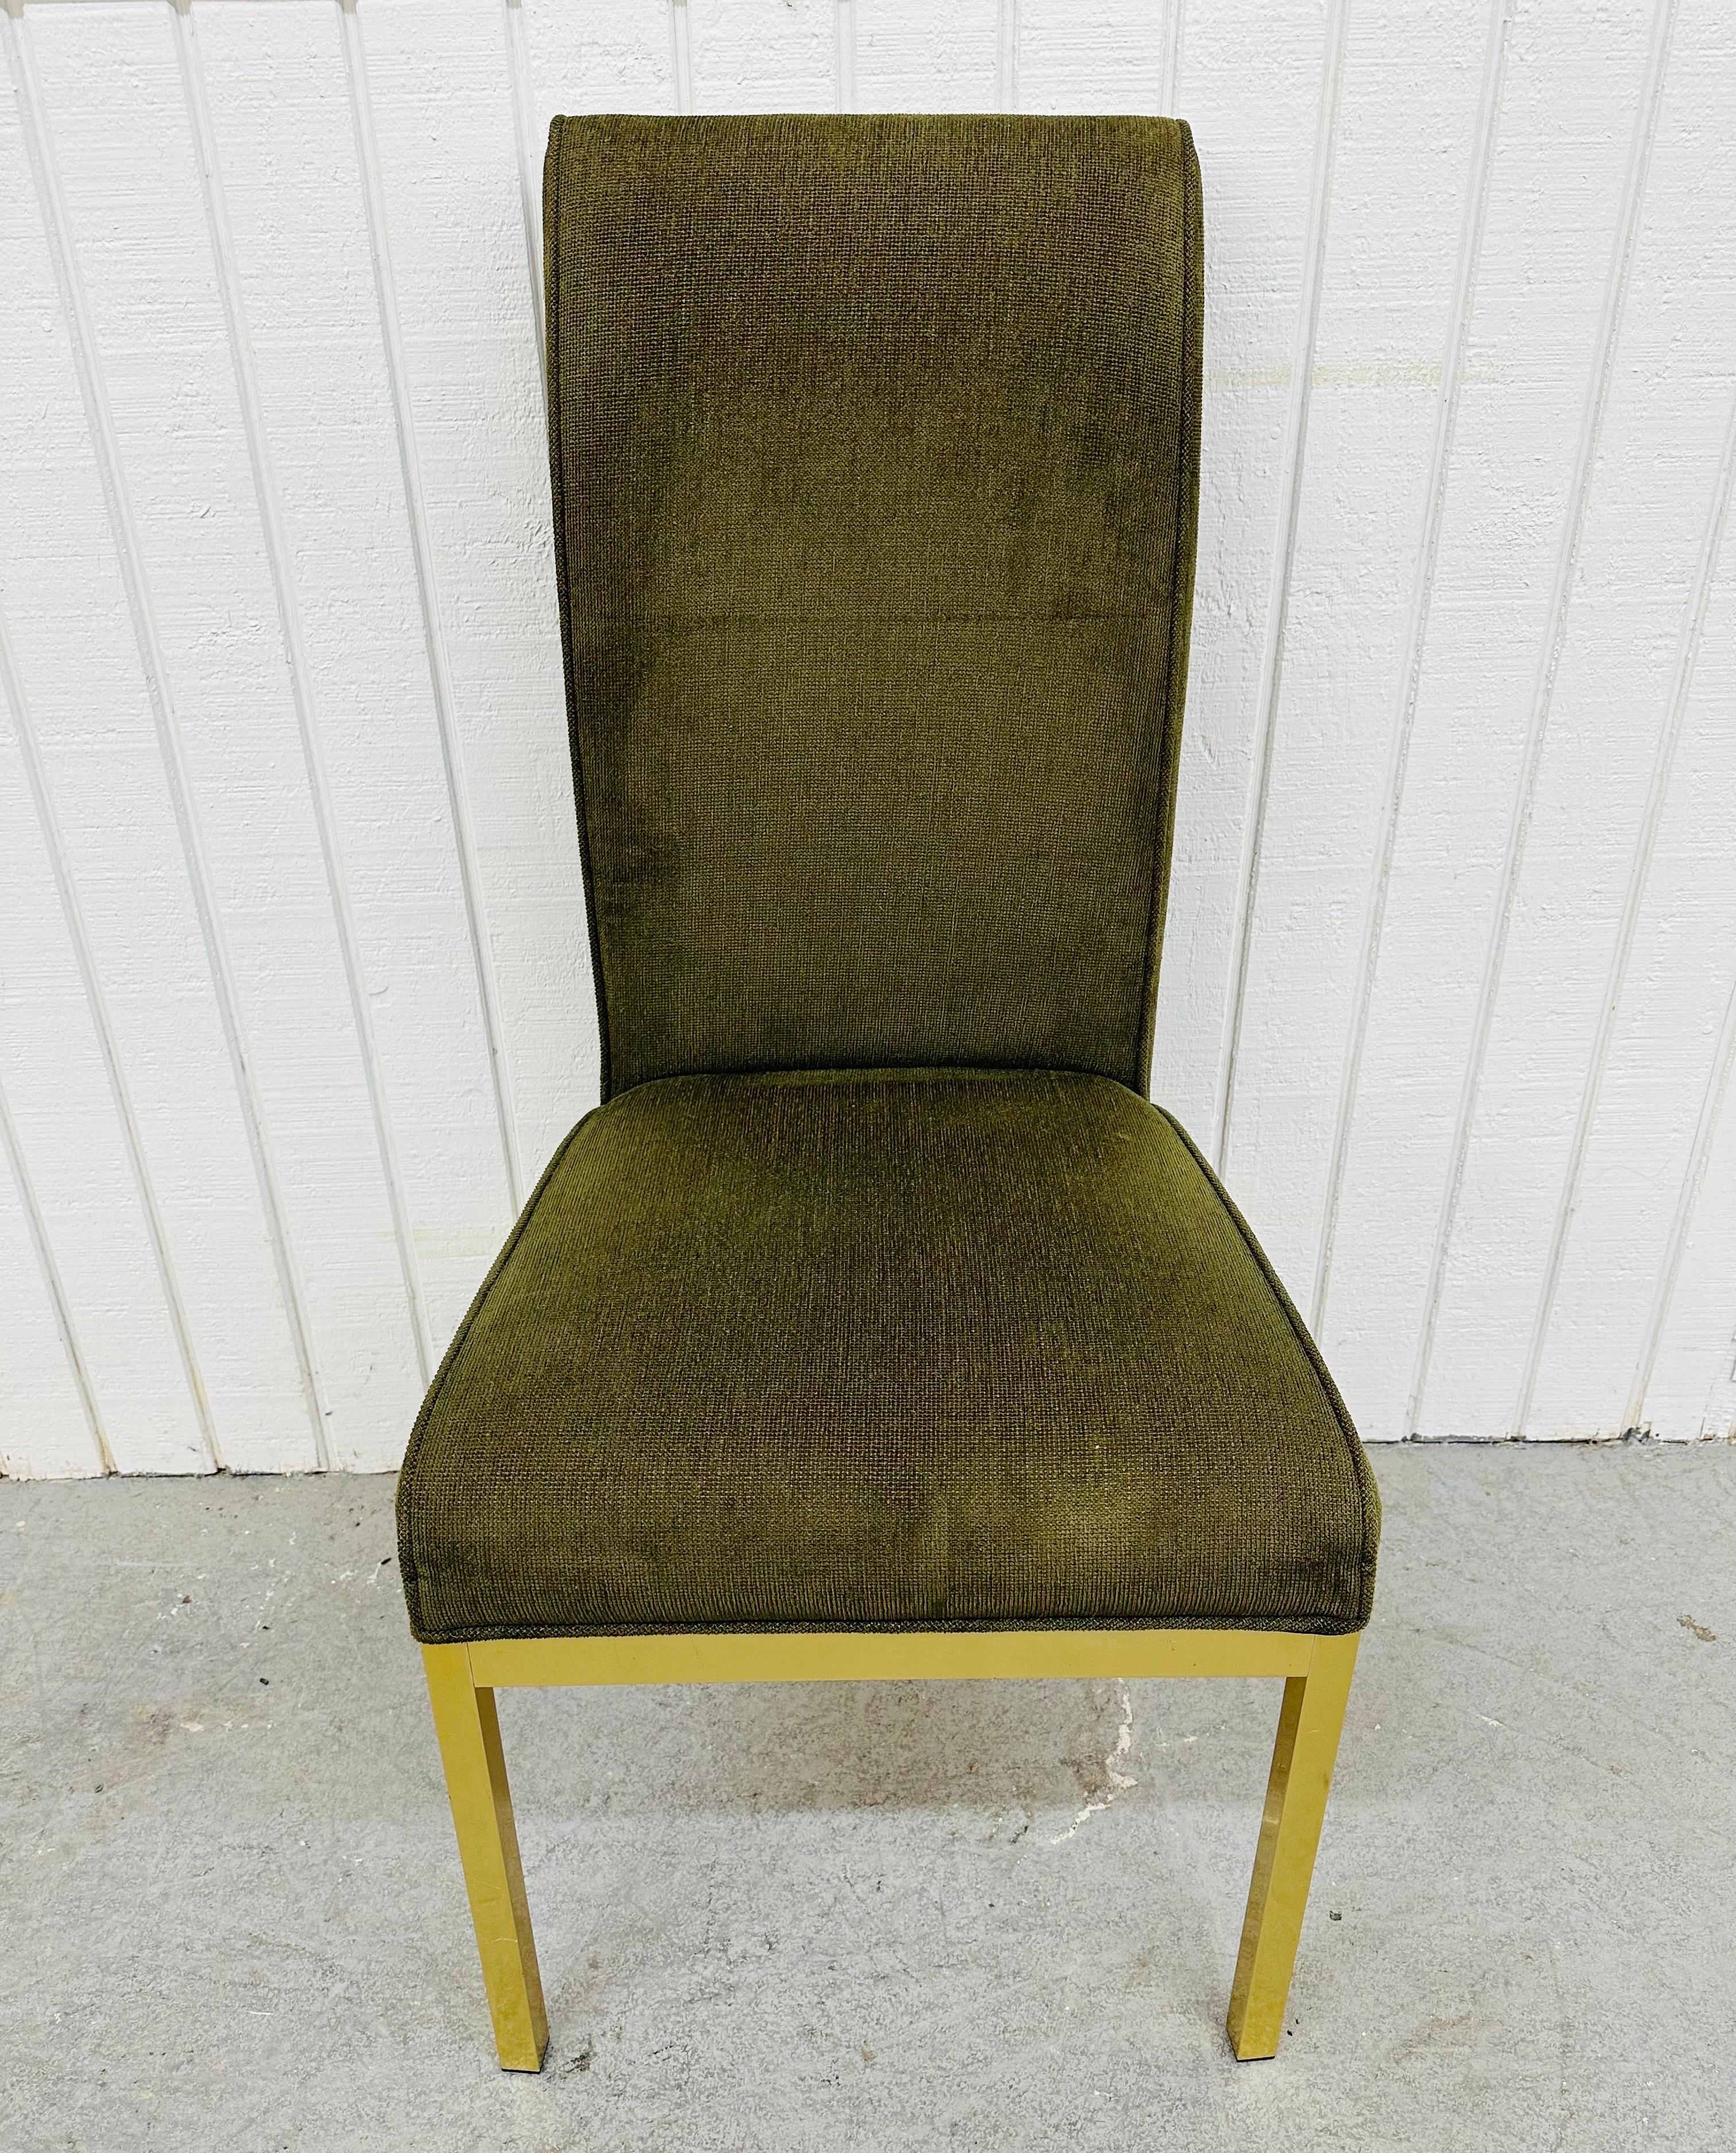 American Post Modern Green Upholstered Brass Dining Chairs - Set of 8 For Sale